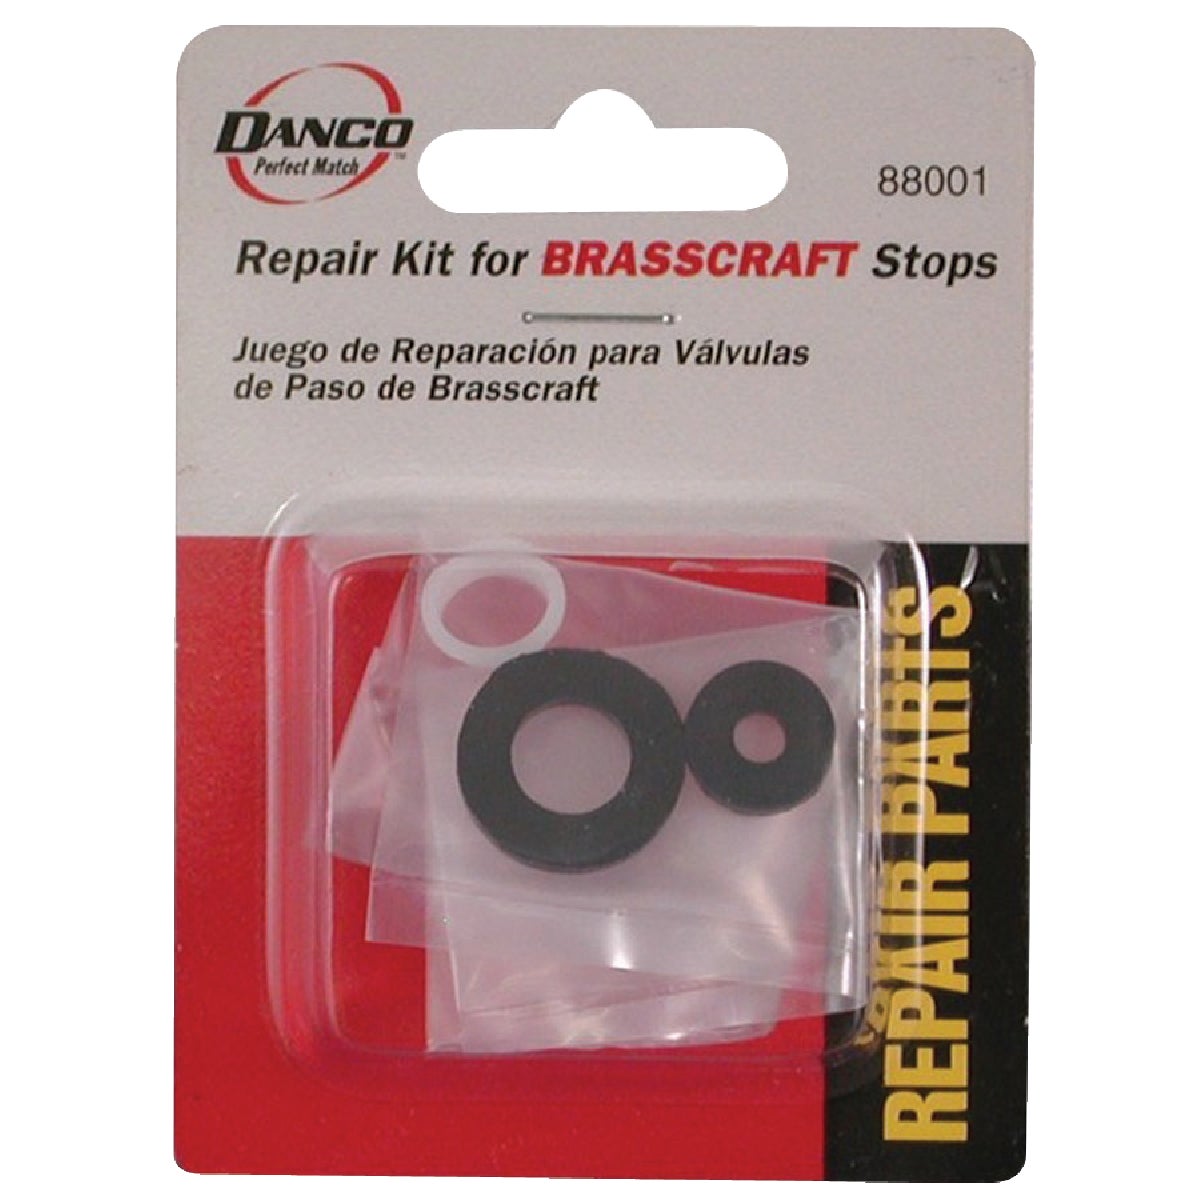 Item 446985, Stop repair kit includes packing, friction ring, and bibb washer